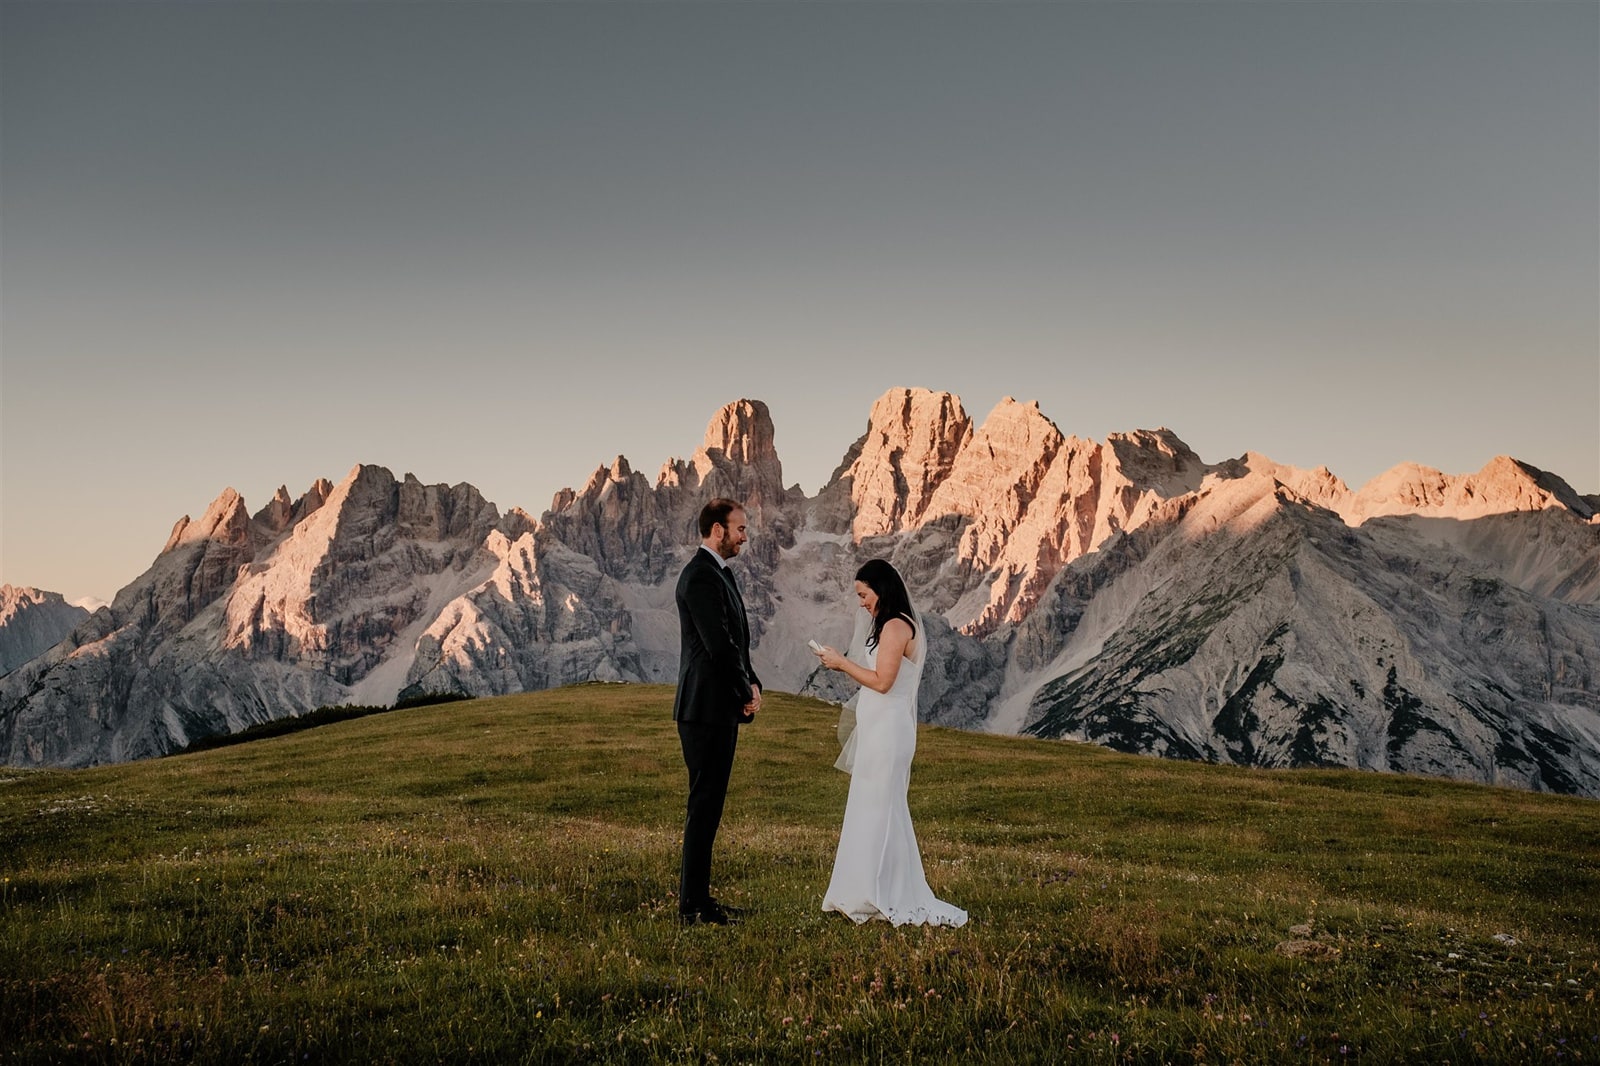 Bride and groom exchange vows at sunrise in the Dolomites in Italy